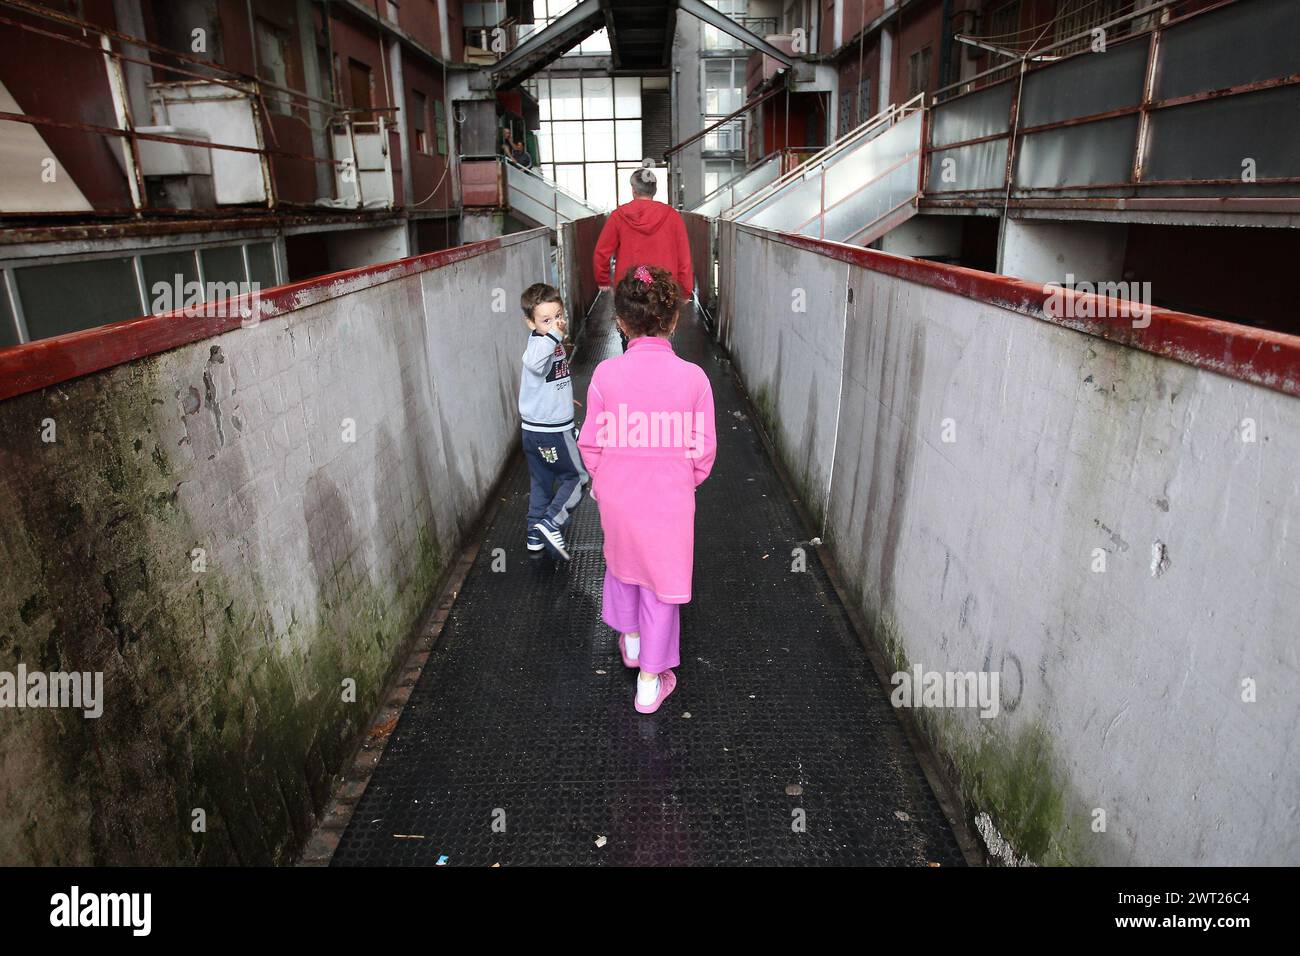 Childs inside a the 'Red Sail' of Scampia. One of the famous buildings in the Scampia district of Naples, where social degradation has reached unsusta Stock Photo